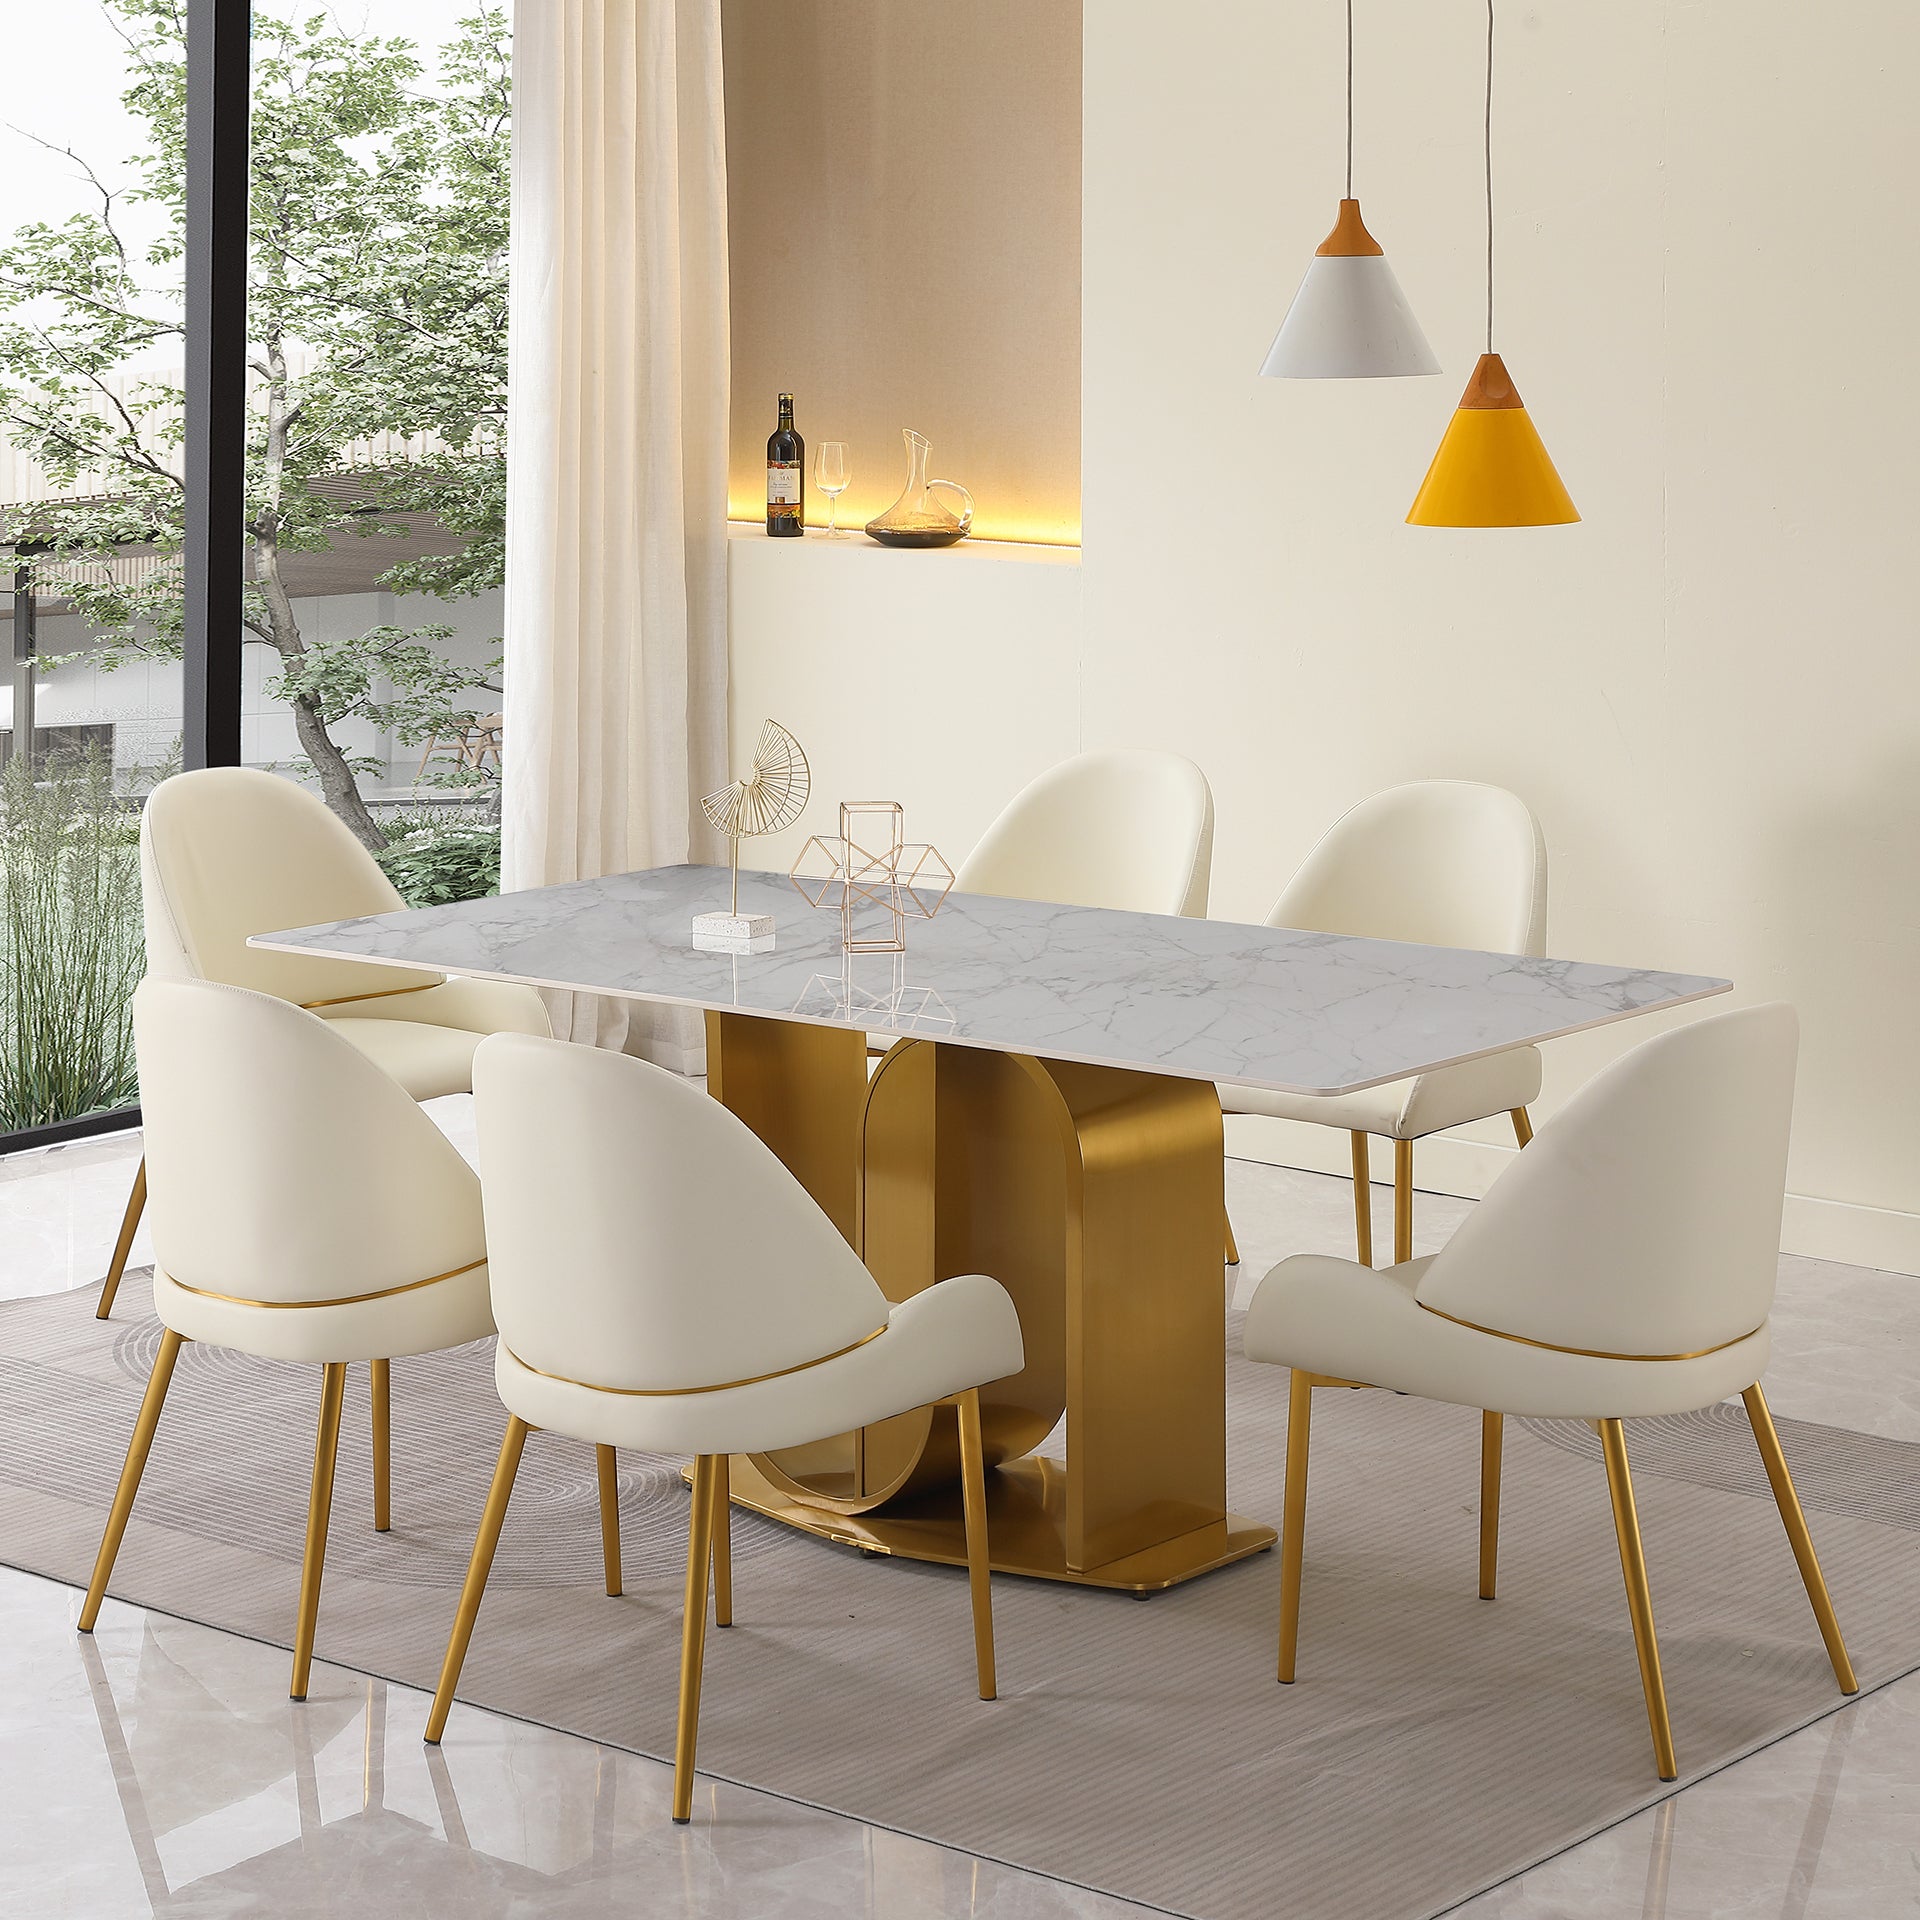 Montary® 71" Contemporary Dining Table in Gold with Sintered Stone Top and U shape Pedestal Base in Gold finish with 6 pcs Chairs